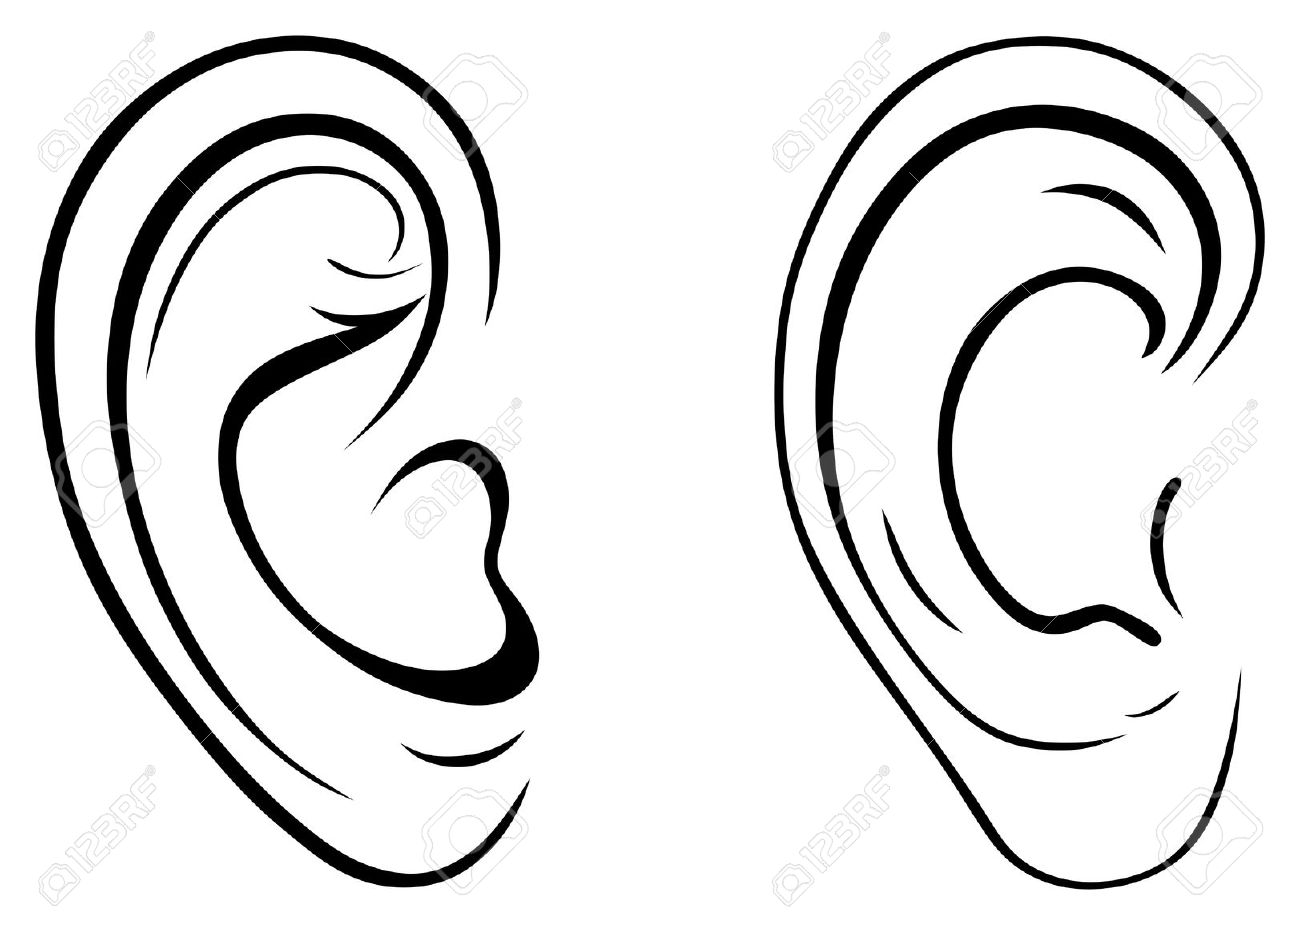 clipart images of ears - photo #12